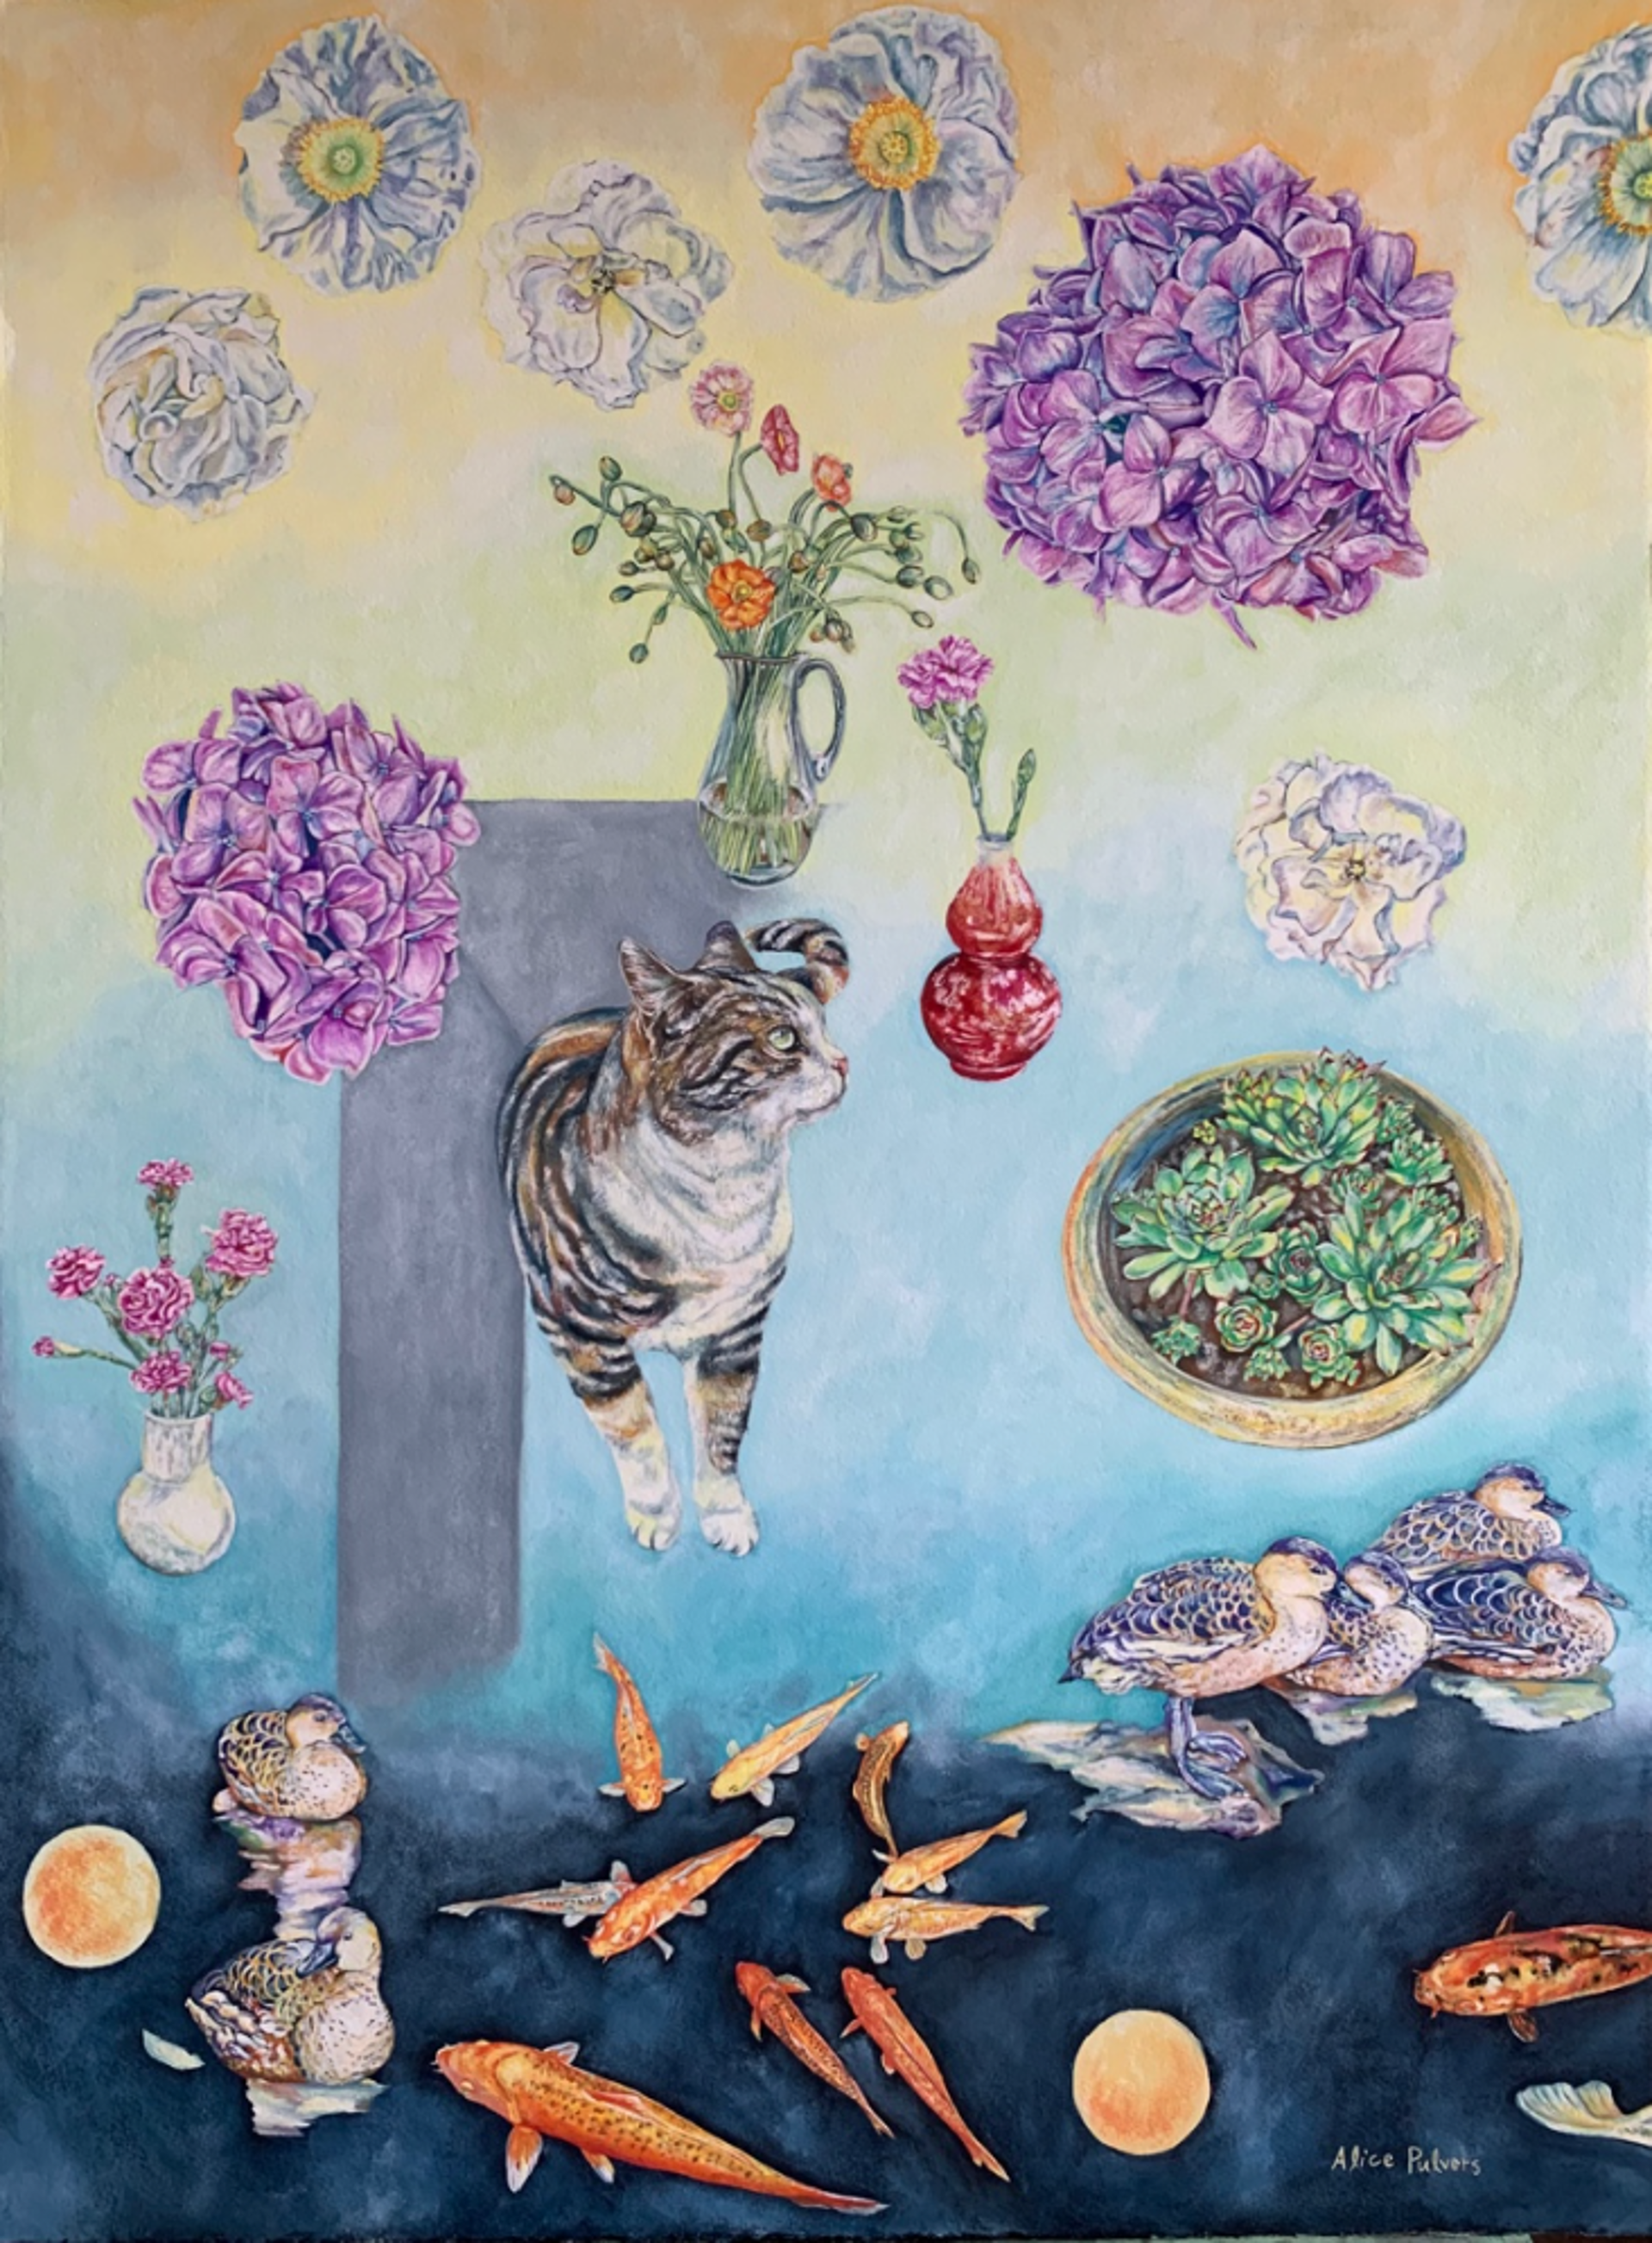 I am a Cat, One (triptych left) by Alice Pulvers